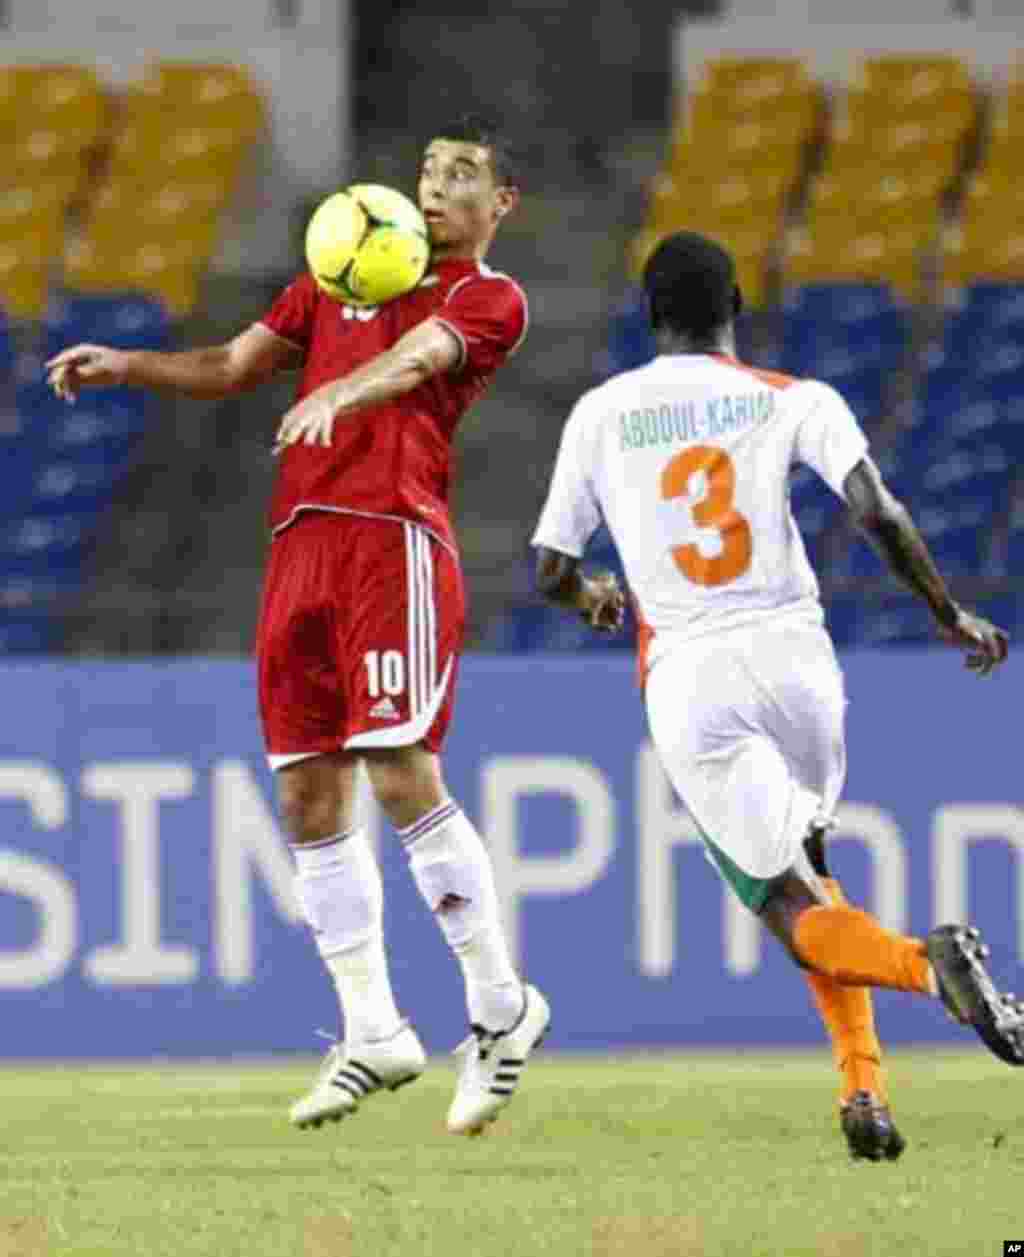 Morocco's Younes Belhanda (10) controls the ball against Niger's Karim Lancina during their final African Cup of Nations Group C soccer match at the Stade De L'Amitie Stadium in Libreville, Gabon January 31, 2012.